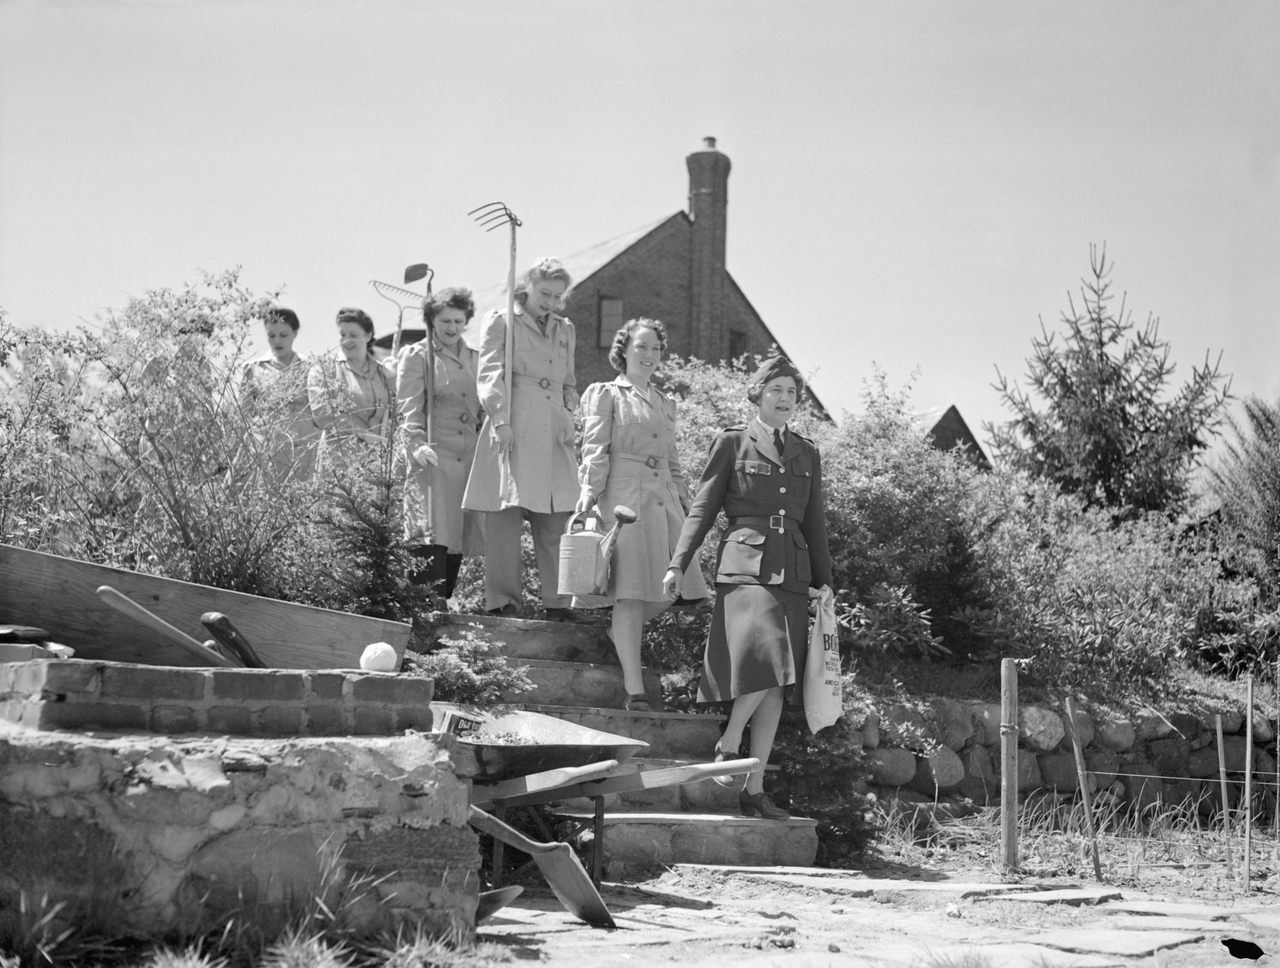 Members of a women's volunteer service in Flushing march into their Victory Garden.